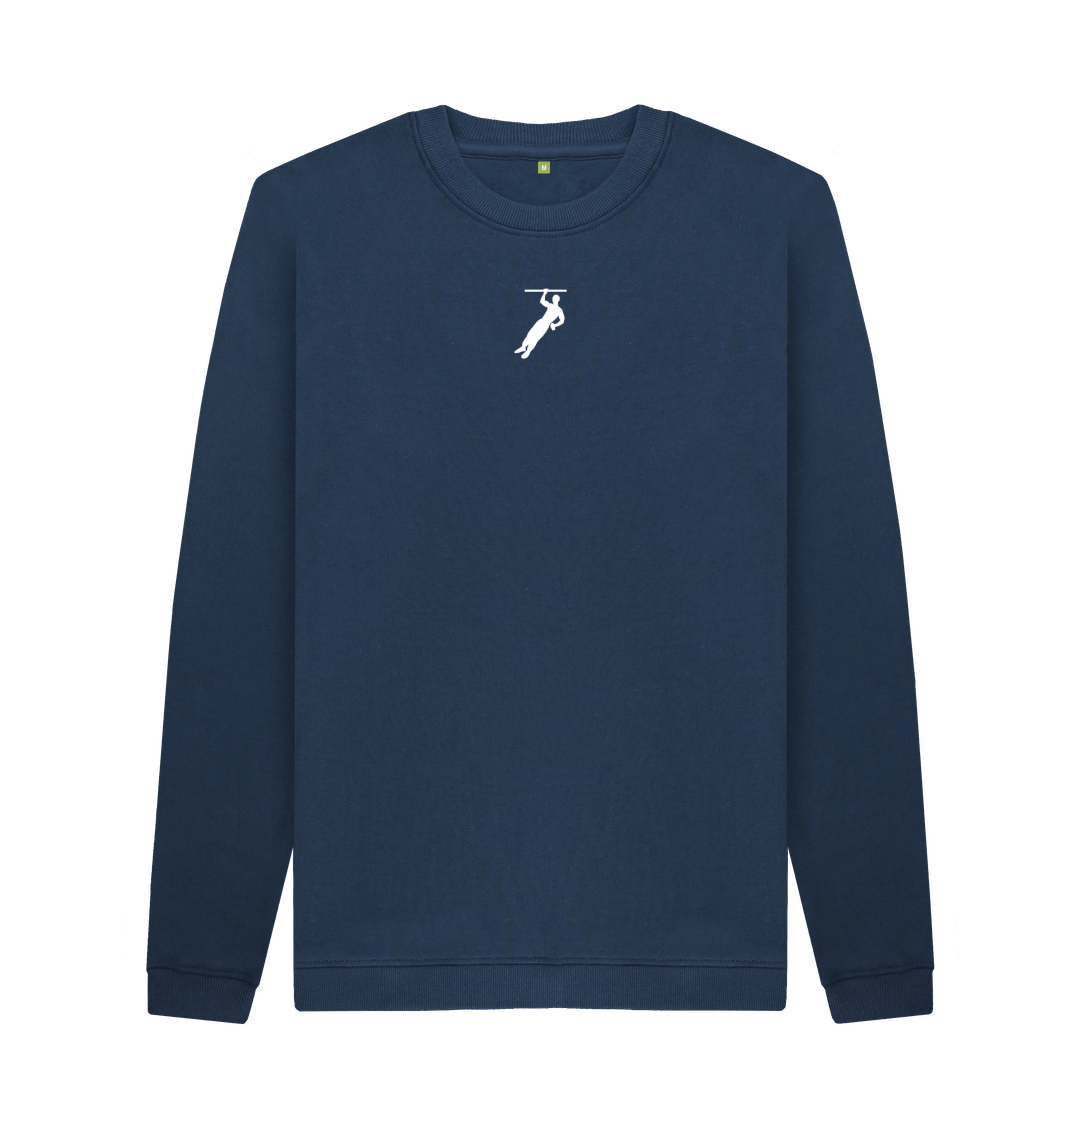 Navy Blue Crew Kneck Sweater with white printed logo